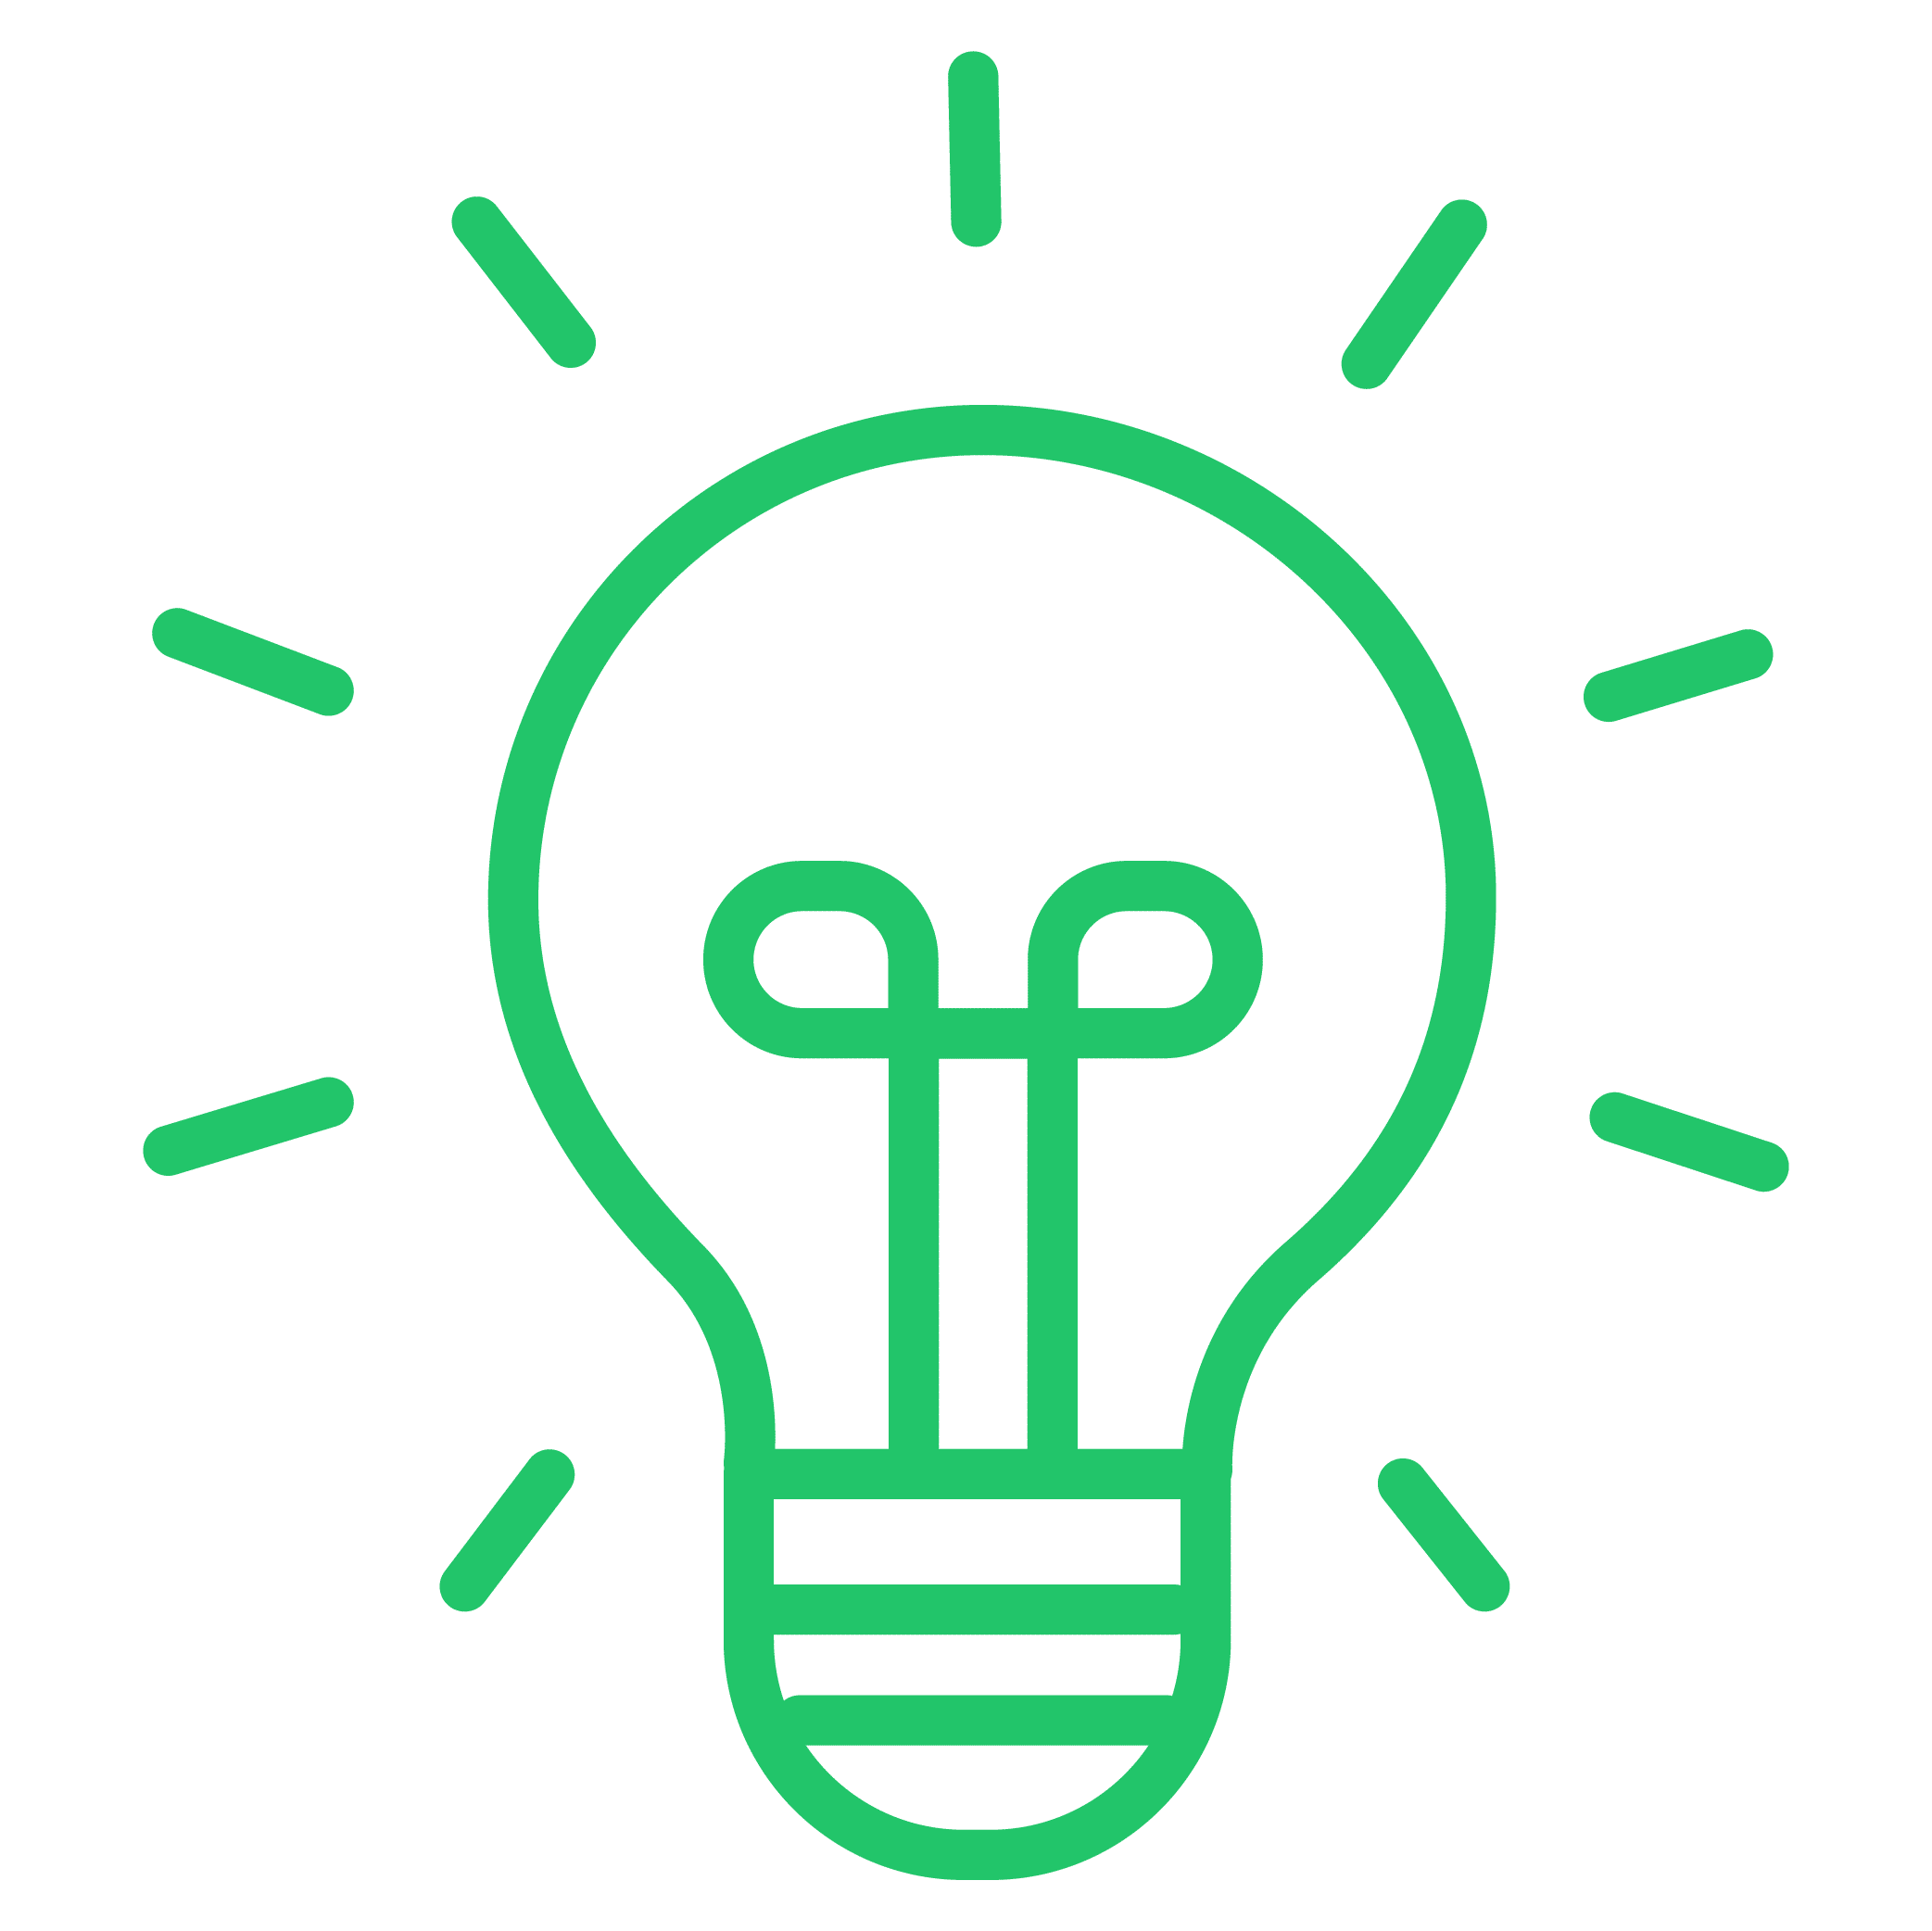 Icon of a lightbulb being used to represent knowledge, knowledge sharing, or a knowledge platform